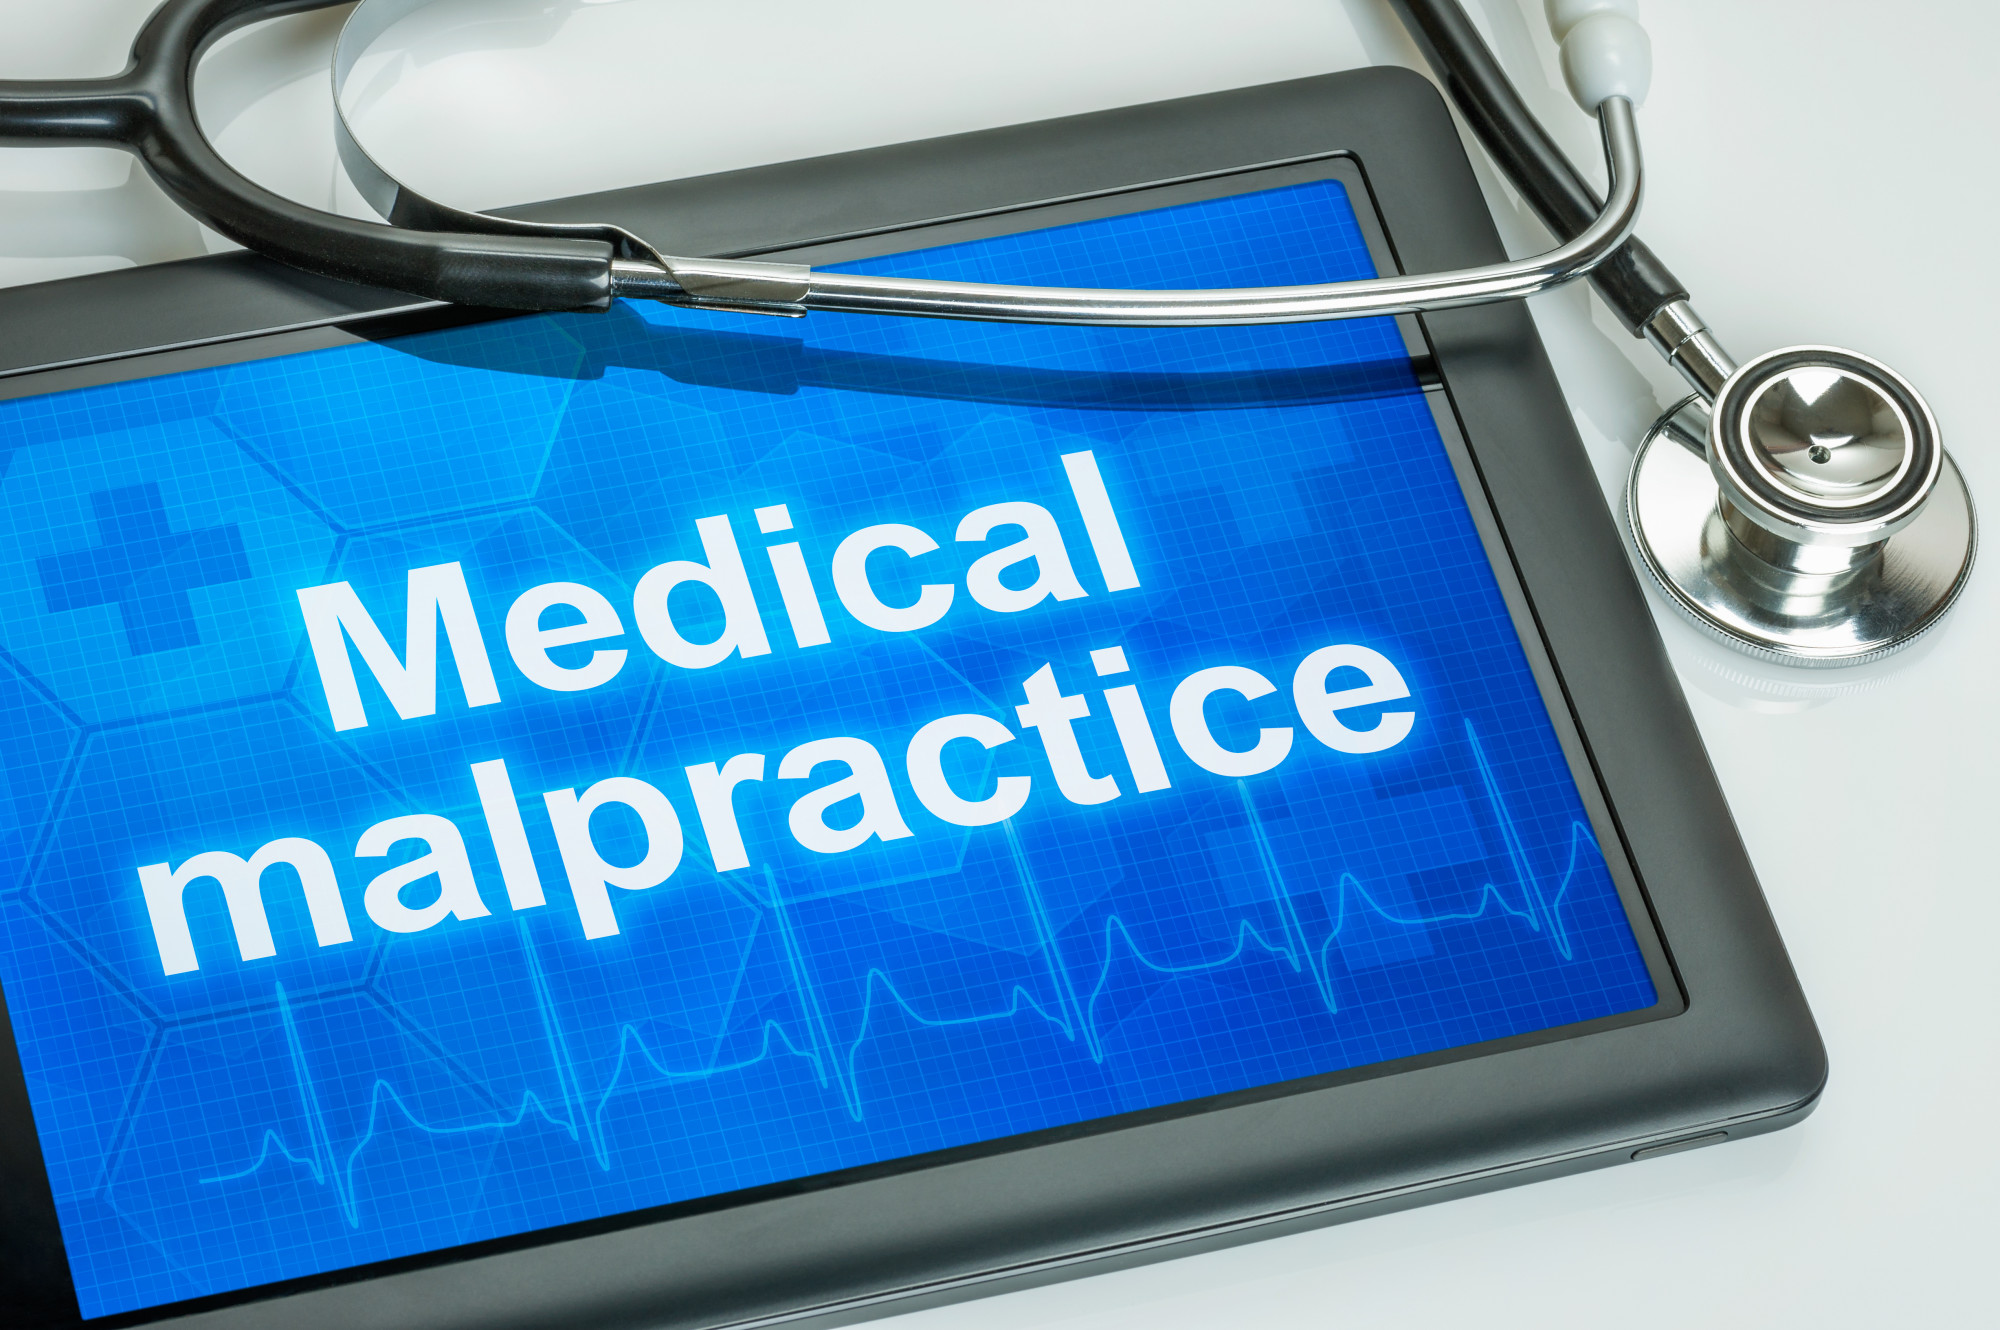 What to Look for in a Medical Malpractice Attorney